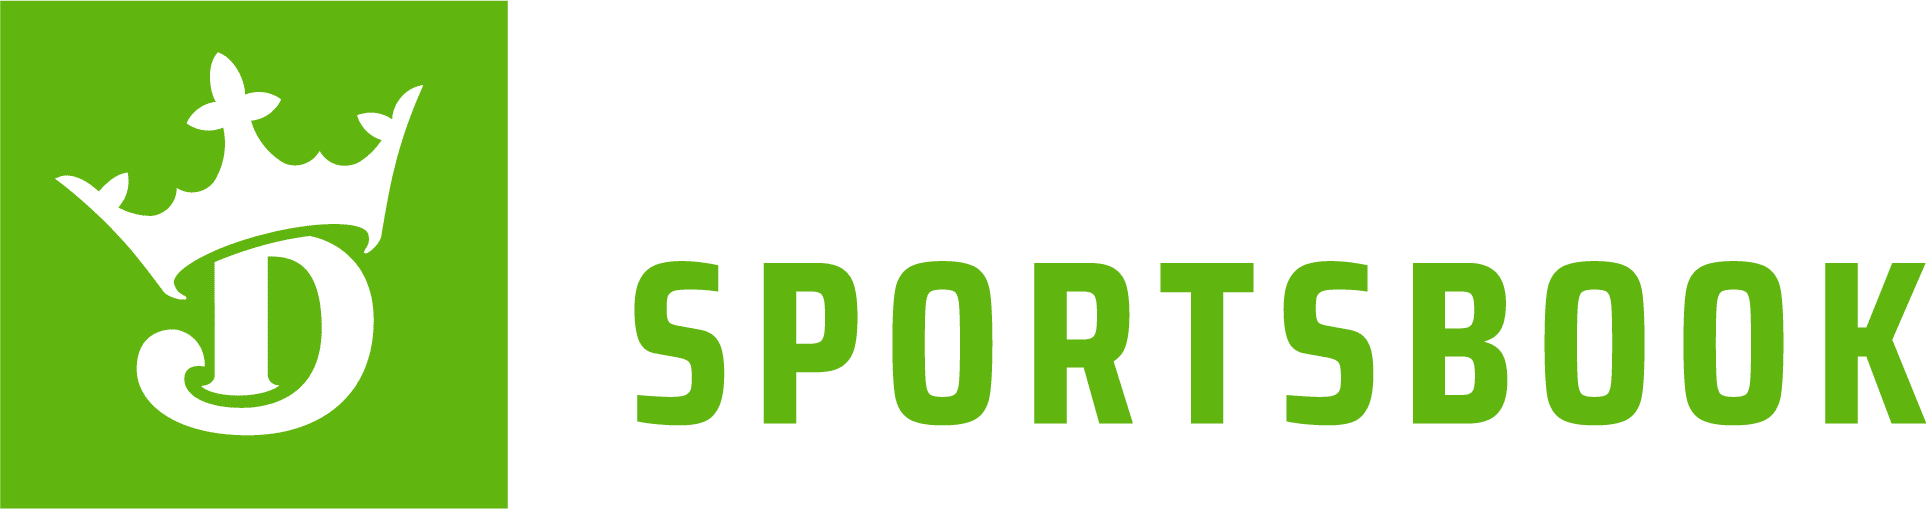 DraftKings Sportsbook on X: $25 FREE BET TO $5,450.30 Quite the win 